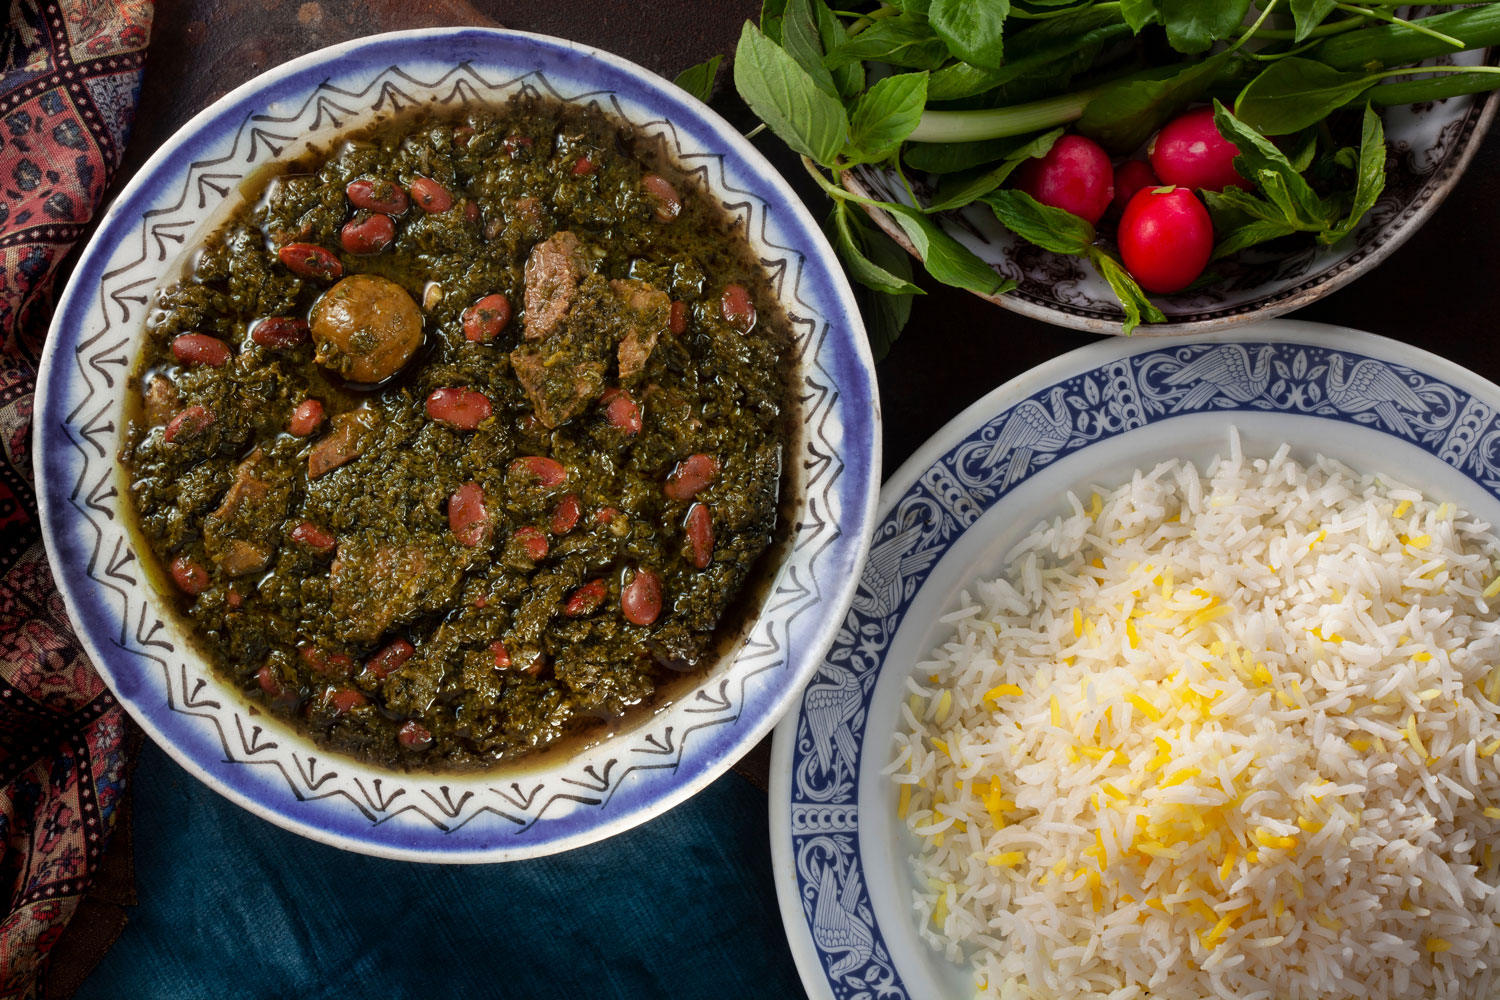 Where to Taste the Finest Authentic Persian Food in Canada?